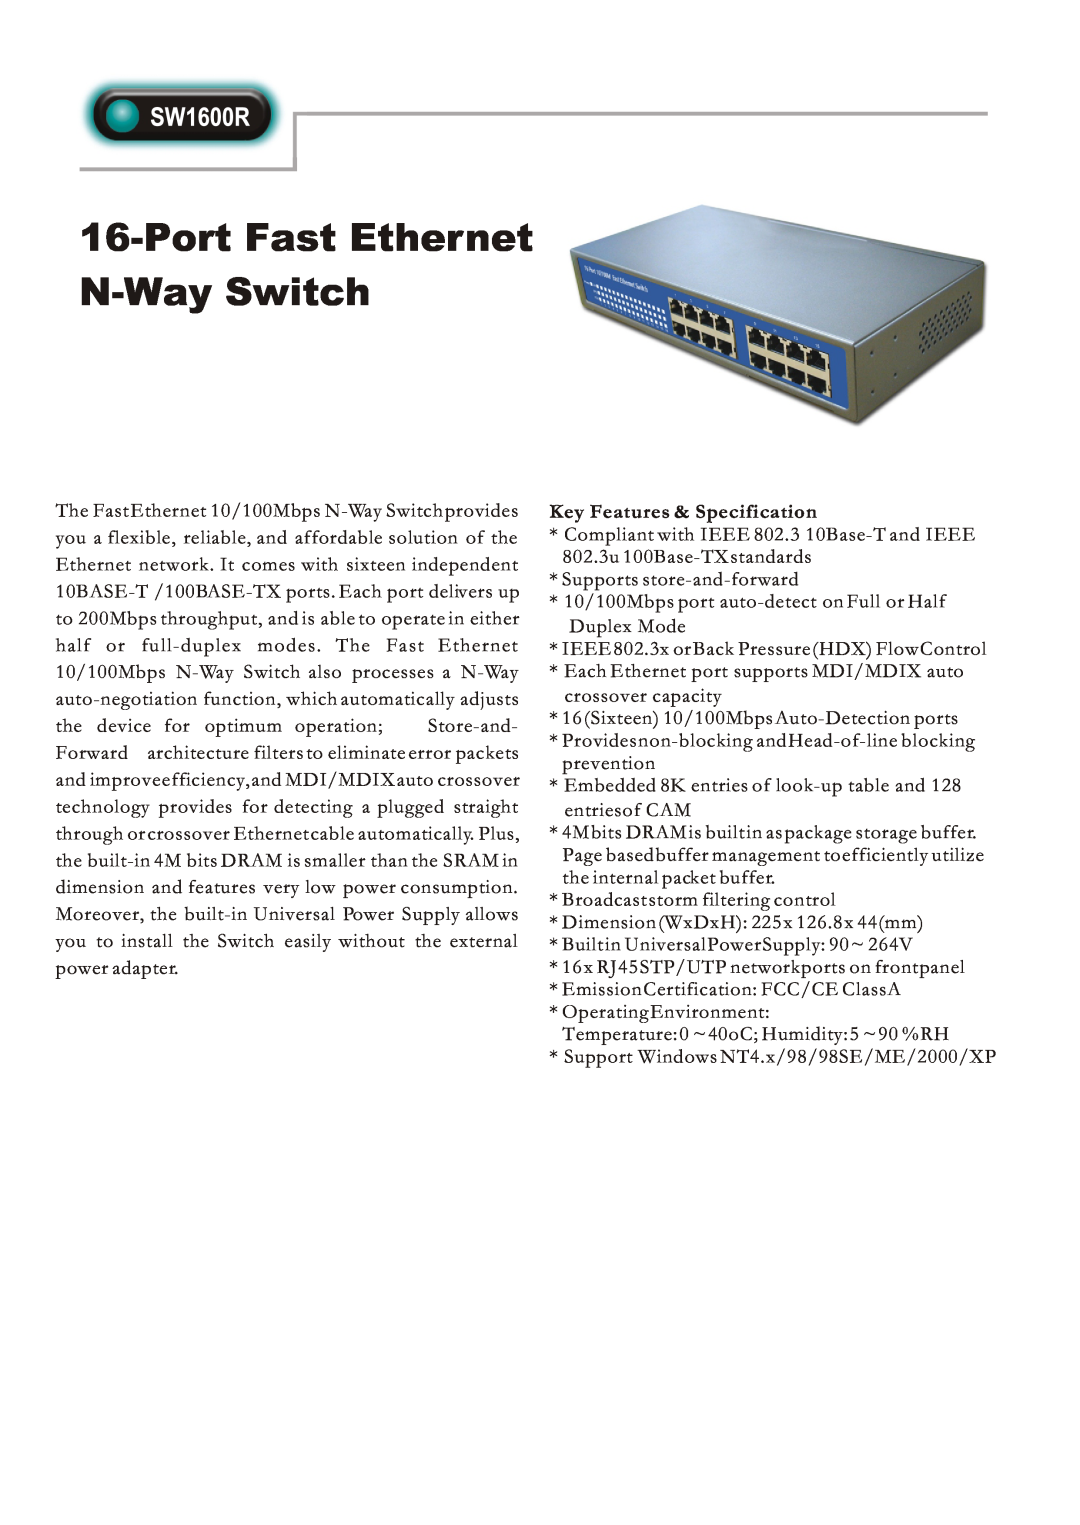 Abocom SW1600R manual Port Fast Ethernet N-Way Switch, Key Features & Specification 